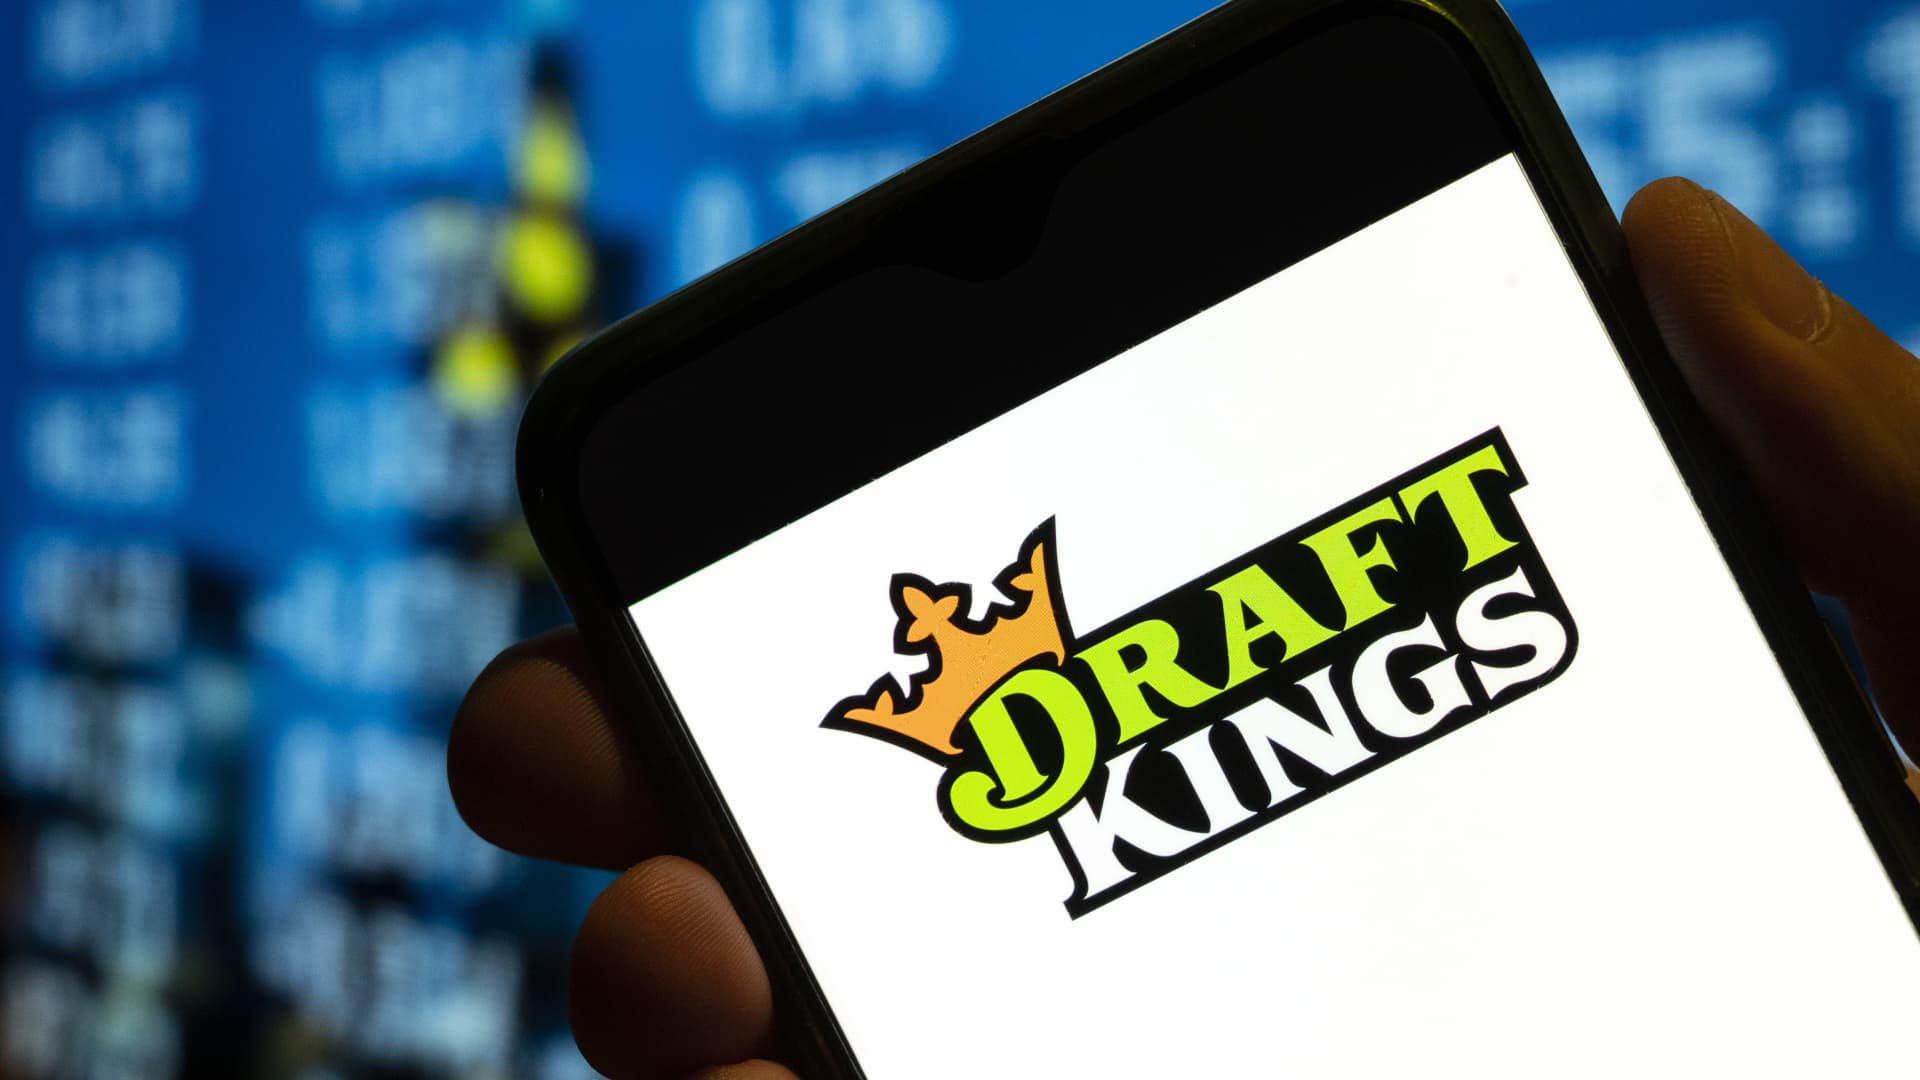 Teen charged with hacking DraftKings, said ‘fraud is fun’